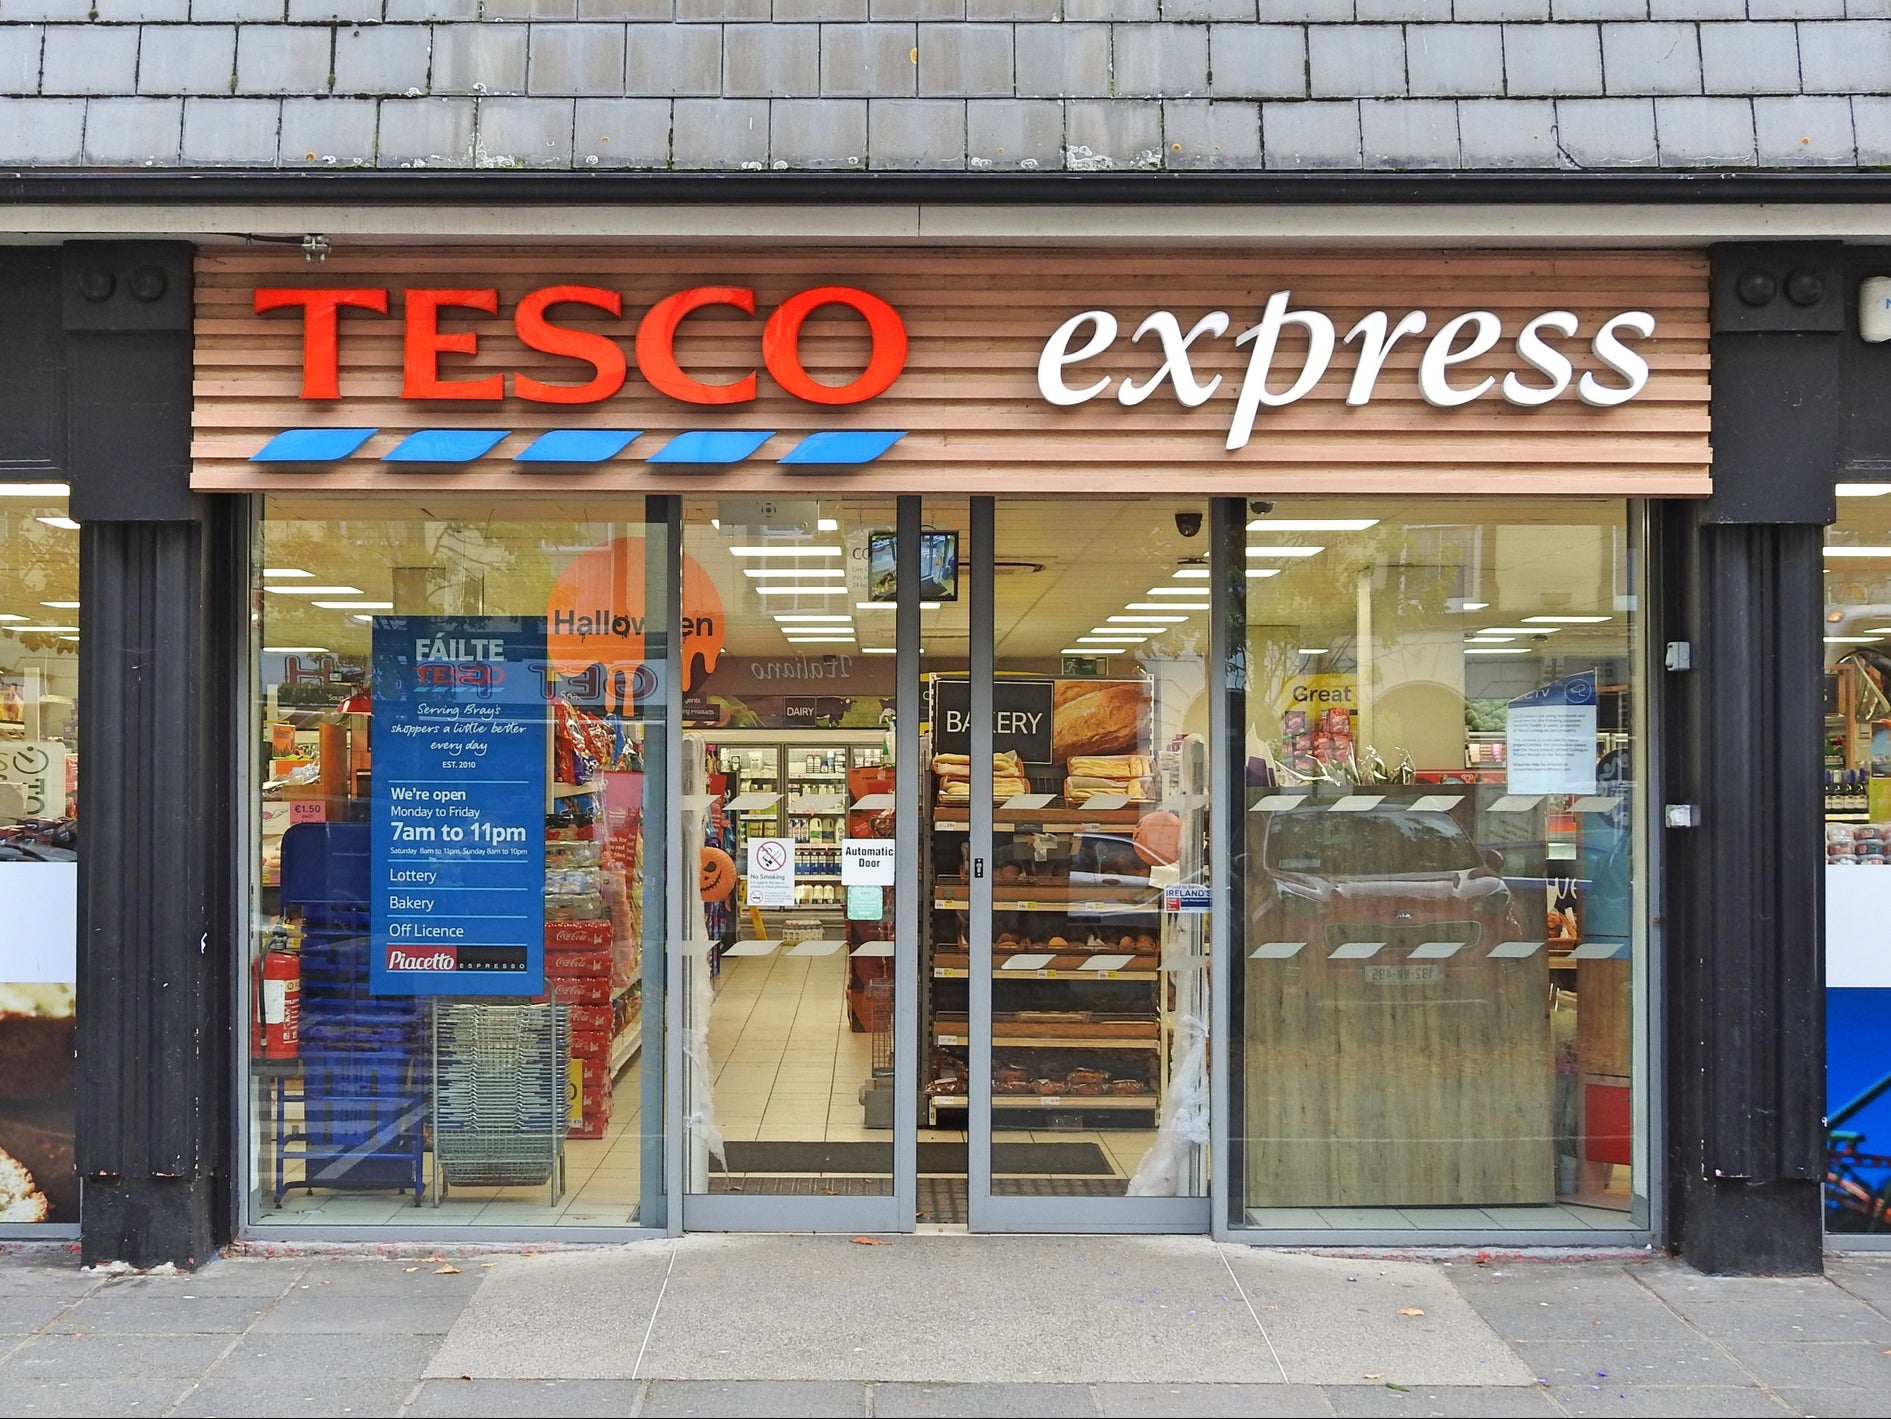 Tesco Express stores are open on Easter Sunday